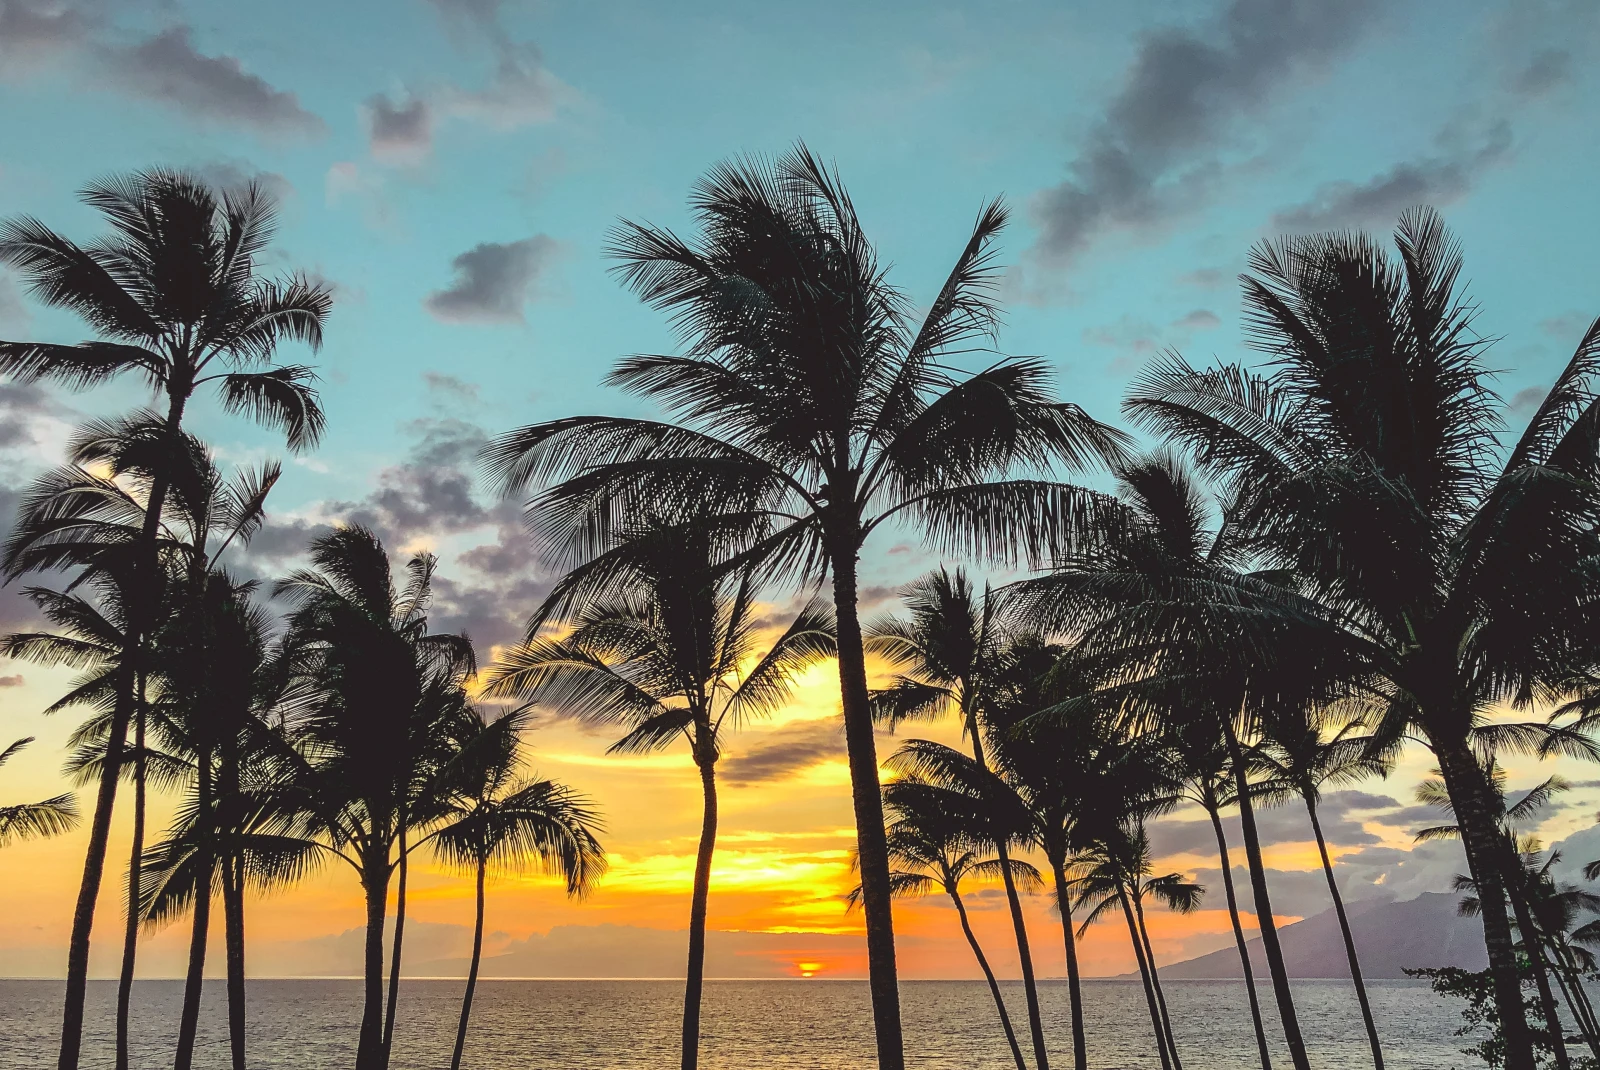 Palm trees with body of water in the background during sunset